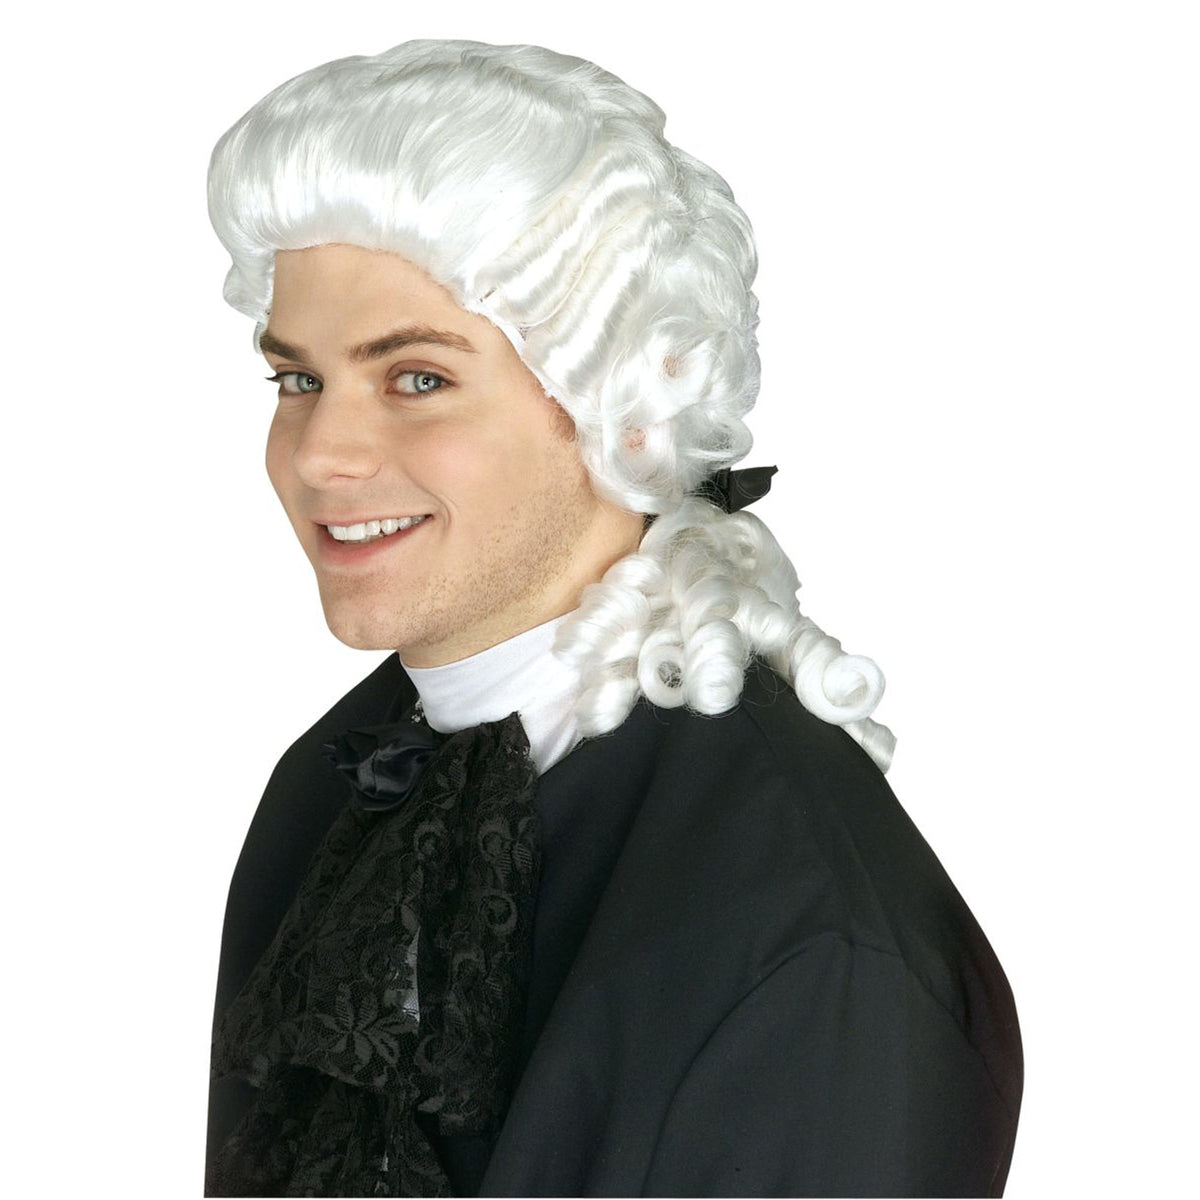 RUBIES II (Ruby Slipper Sales) Costume Accessories White Colonial Wig for Adults, Bridgerton 082686507974